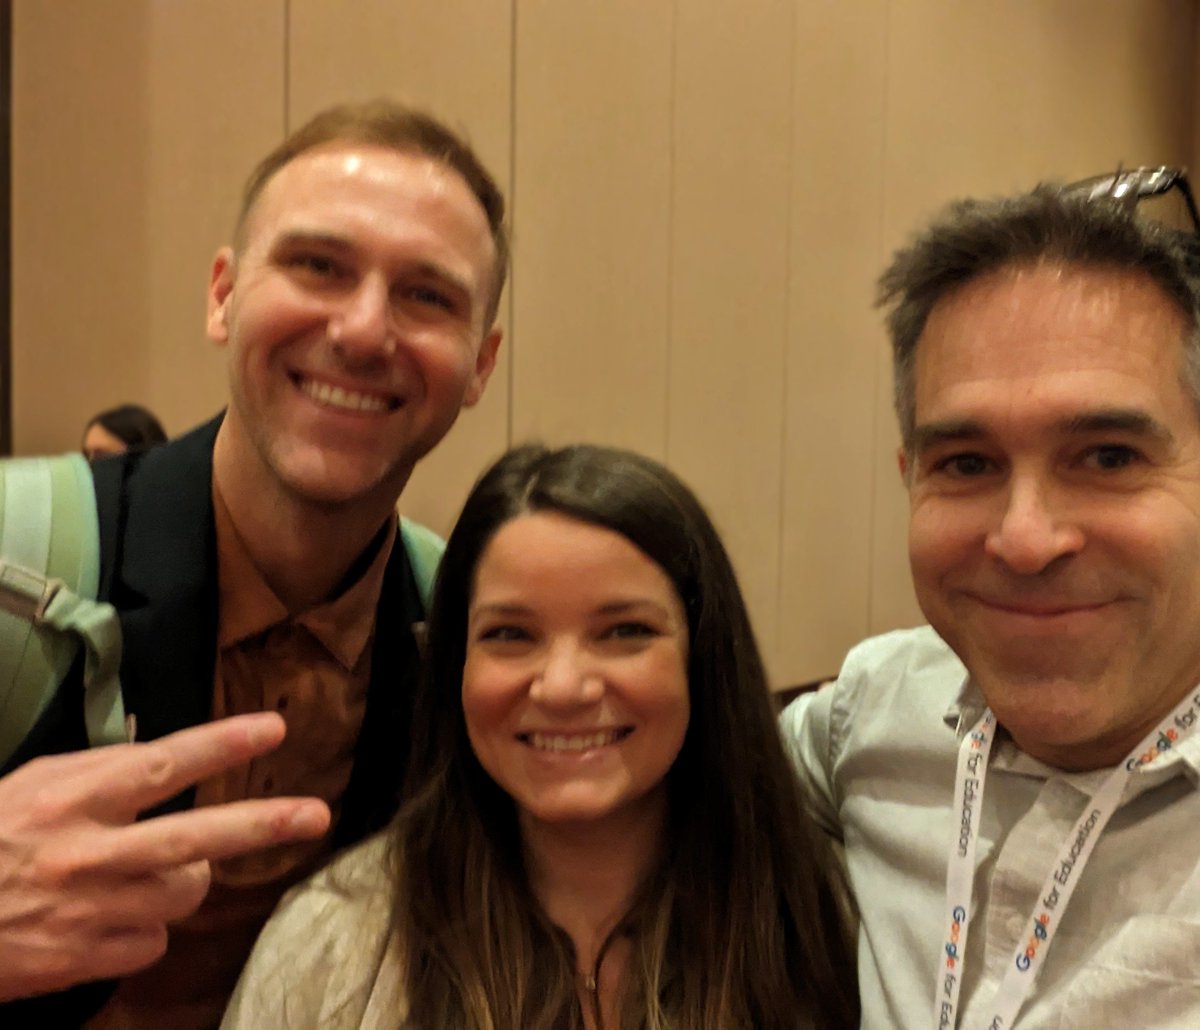 Forget the tables, I hit the jackpot at @tylertarver 's hysterical and insightful keynote this morning at #Techspo24. And of course he pulled the excellent @MissEduTech up on stage @GoogleForEdu